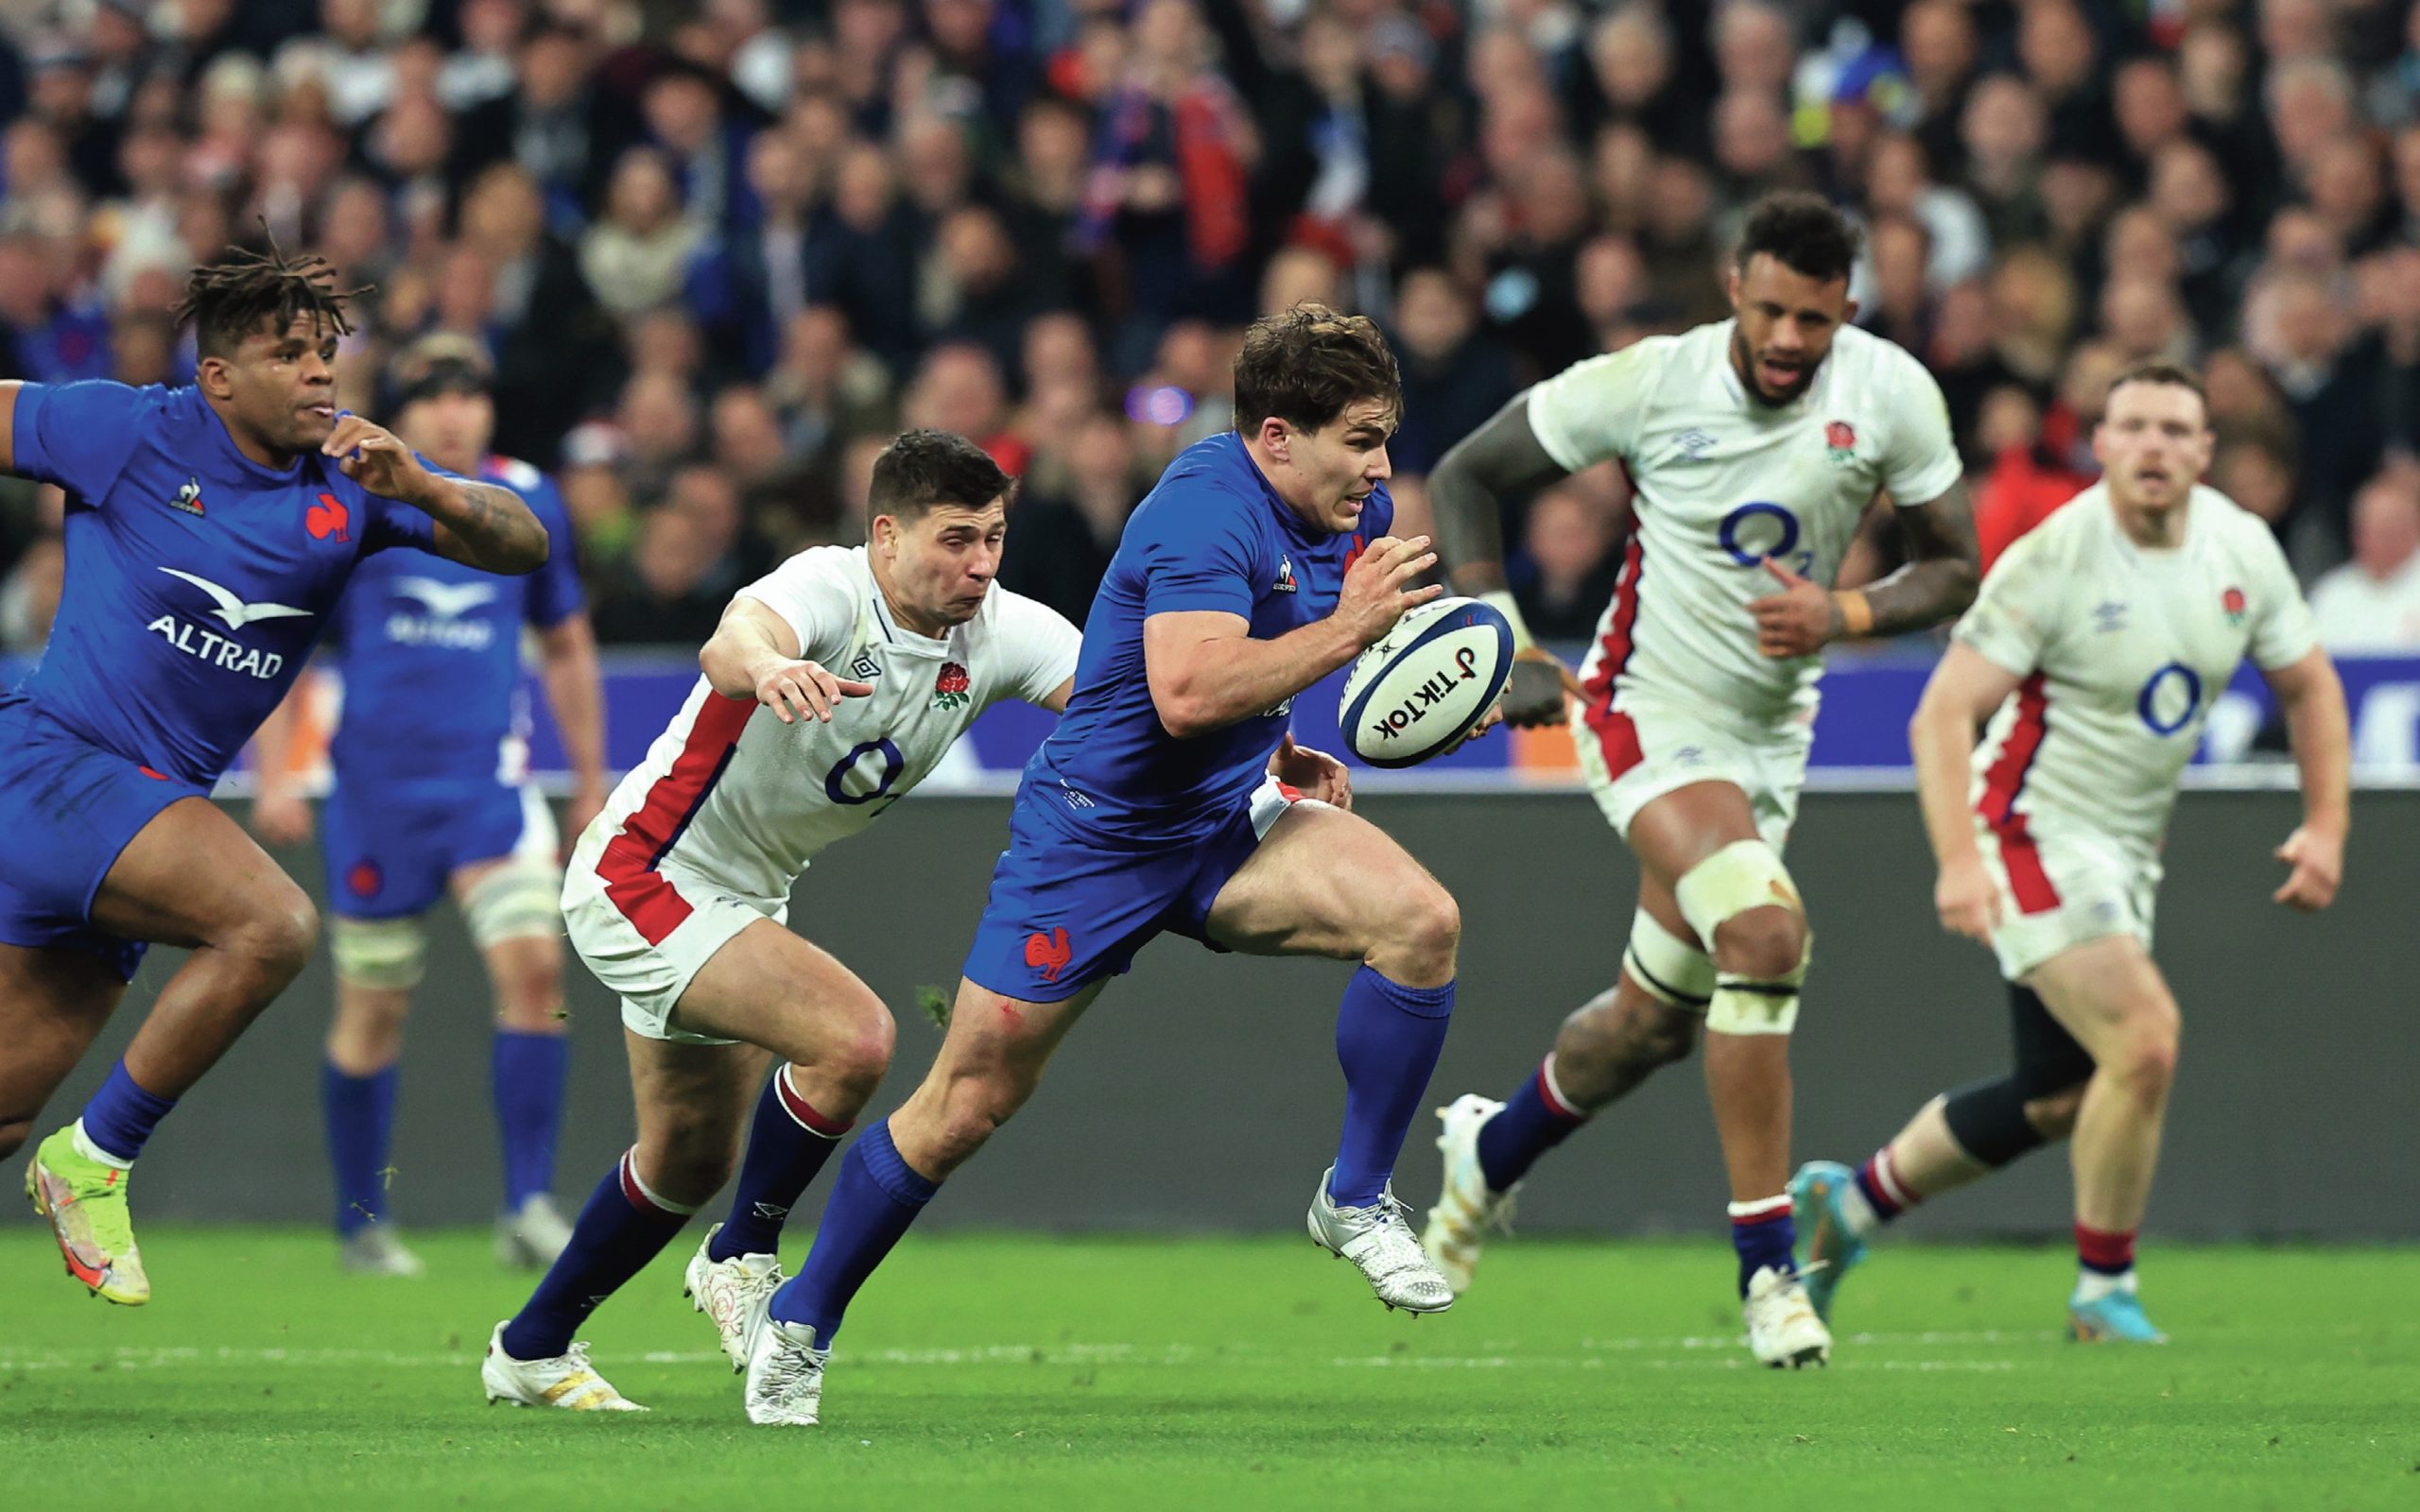 Six Nations signs extension with French public service broadcaster France Télévisions